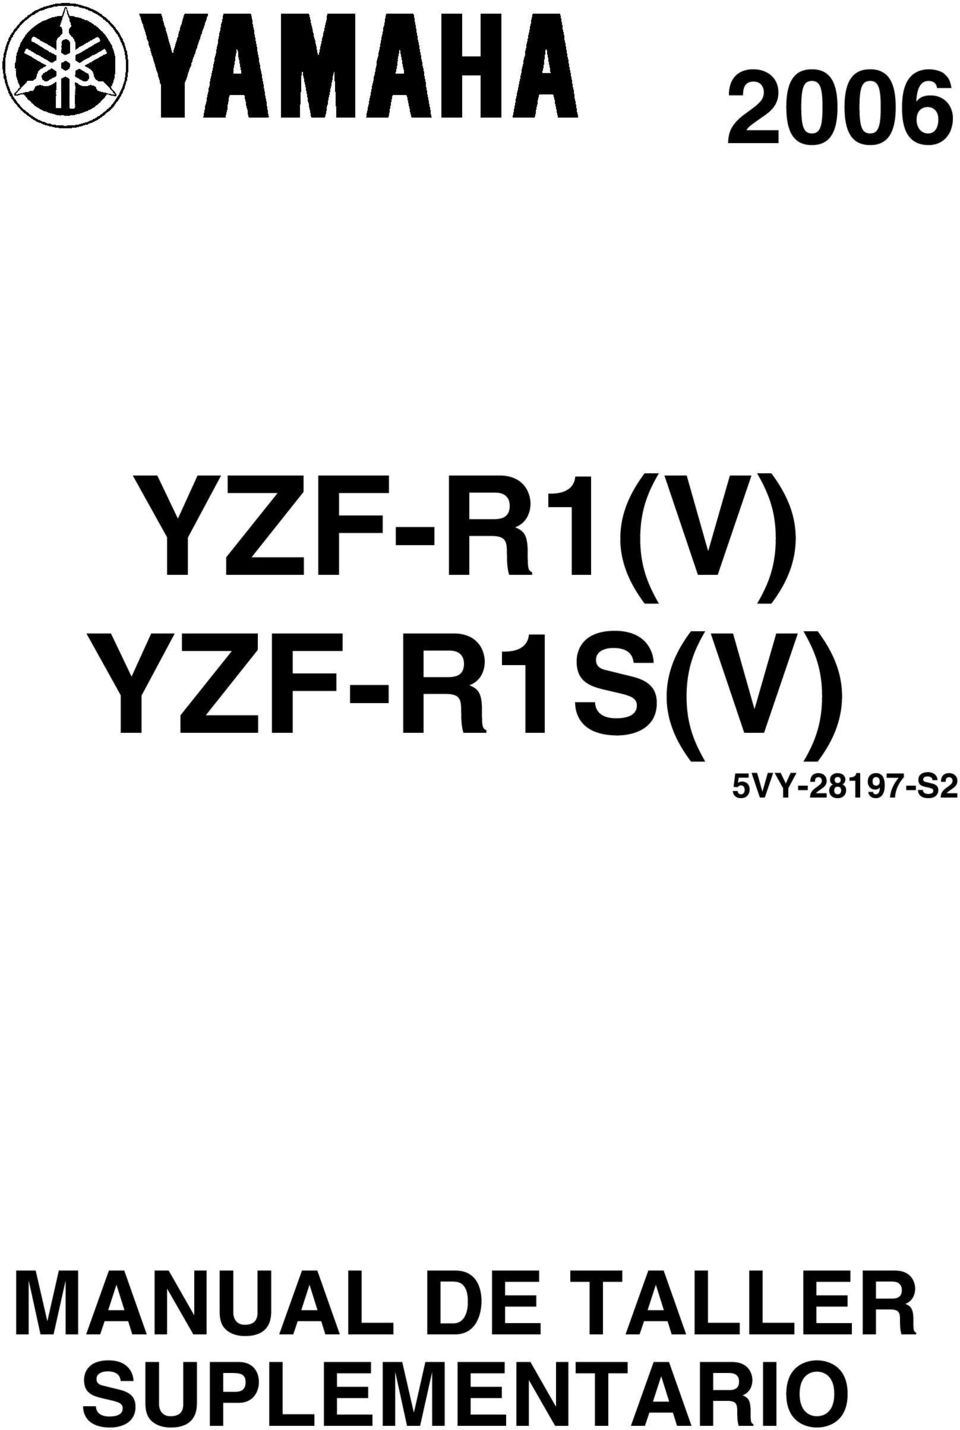 5VY-28197-S2